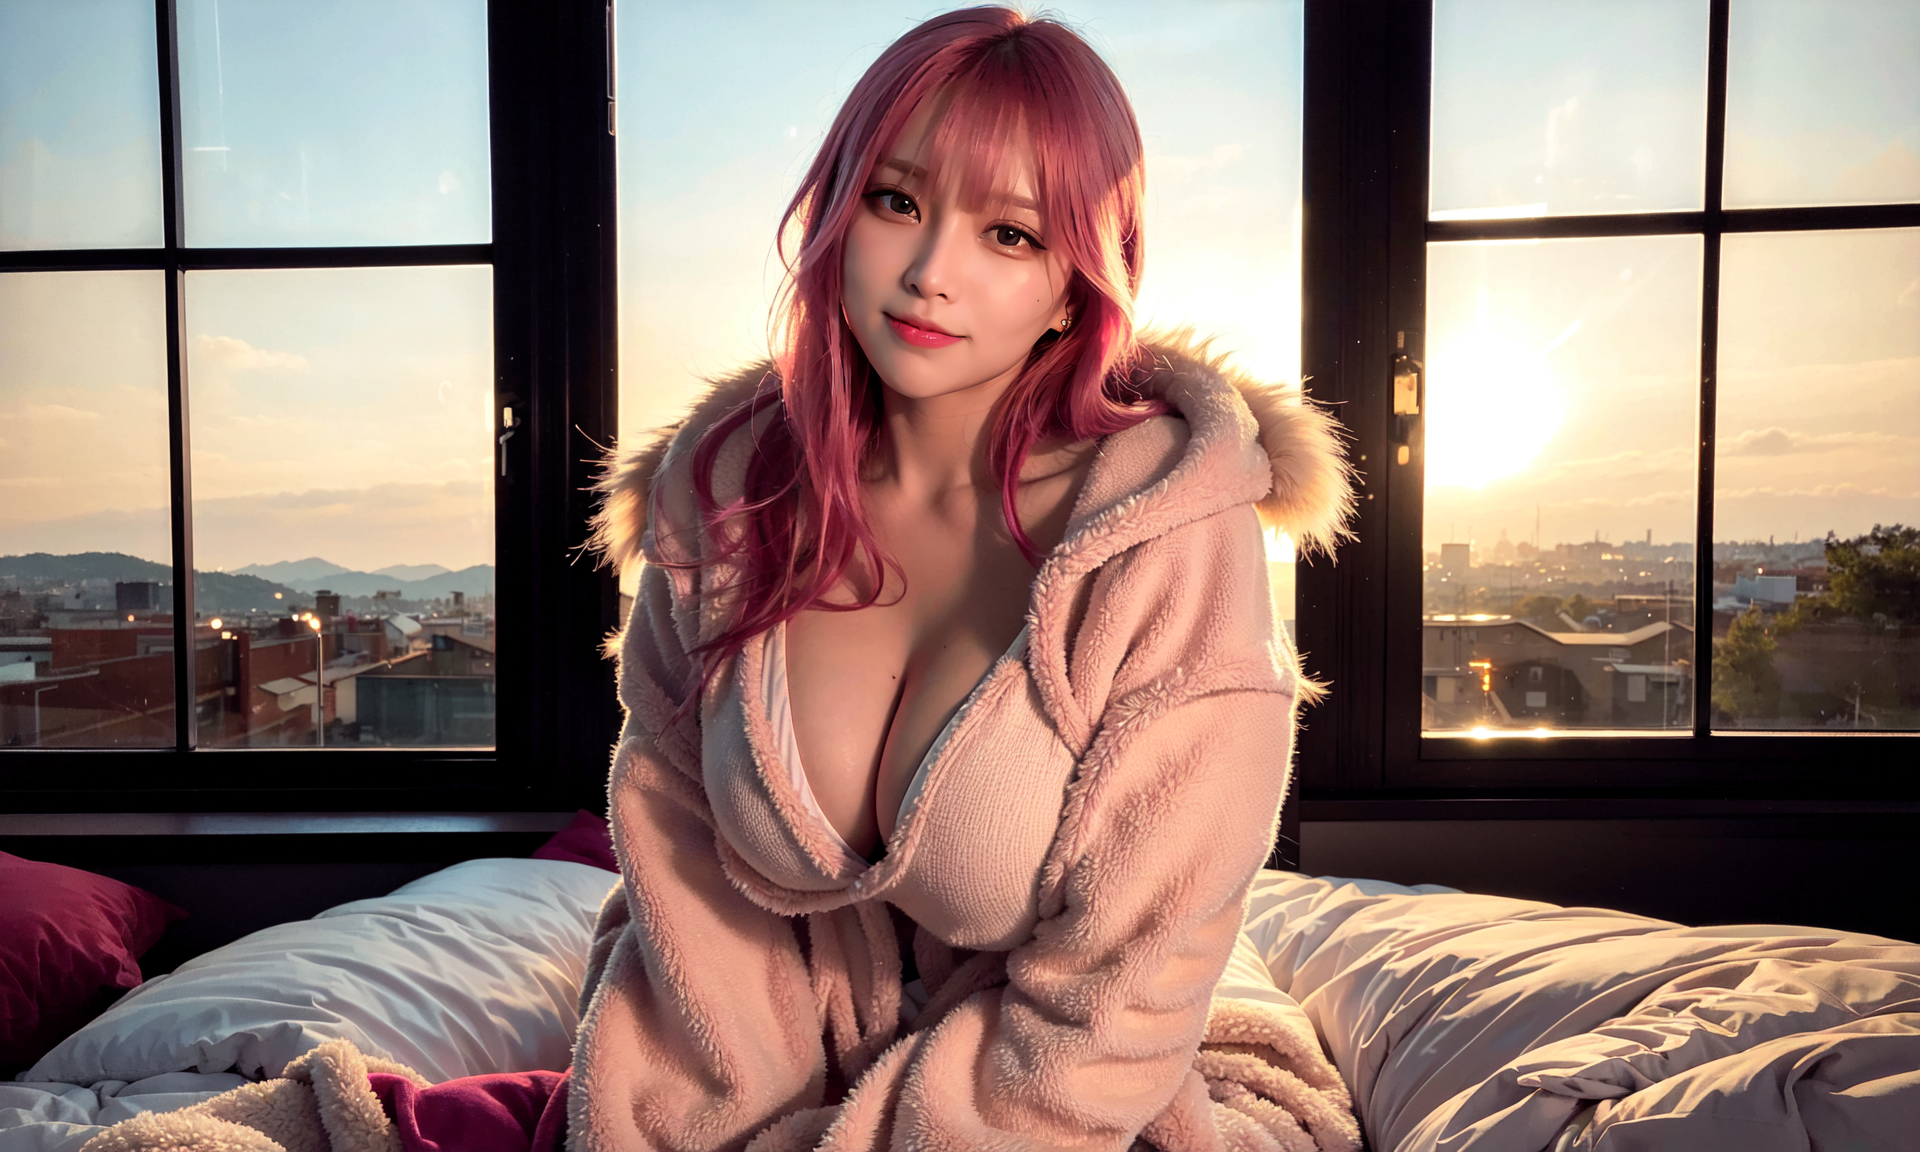 General 1920x1152 AI art women SanKo morning cleavage looking at viewer illustration digital art mole under eye Asian big boobs sunset glow sunset sunlight smiling sky clouds city mountains moles mole on breast long hair window